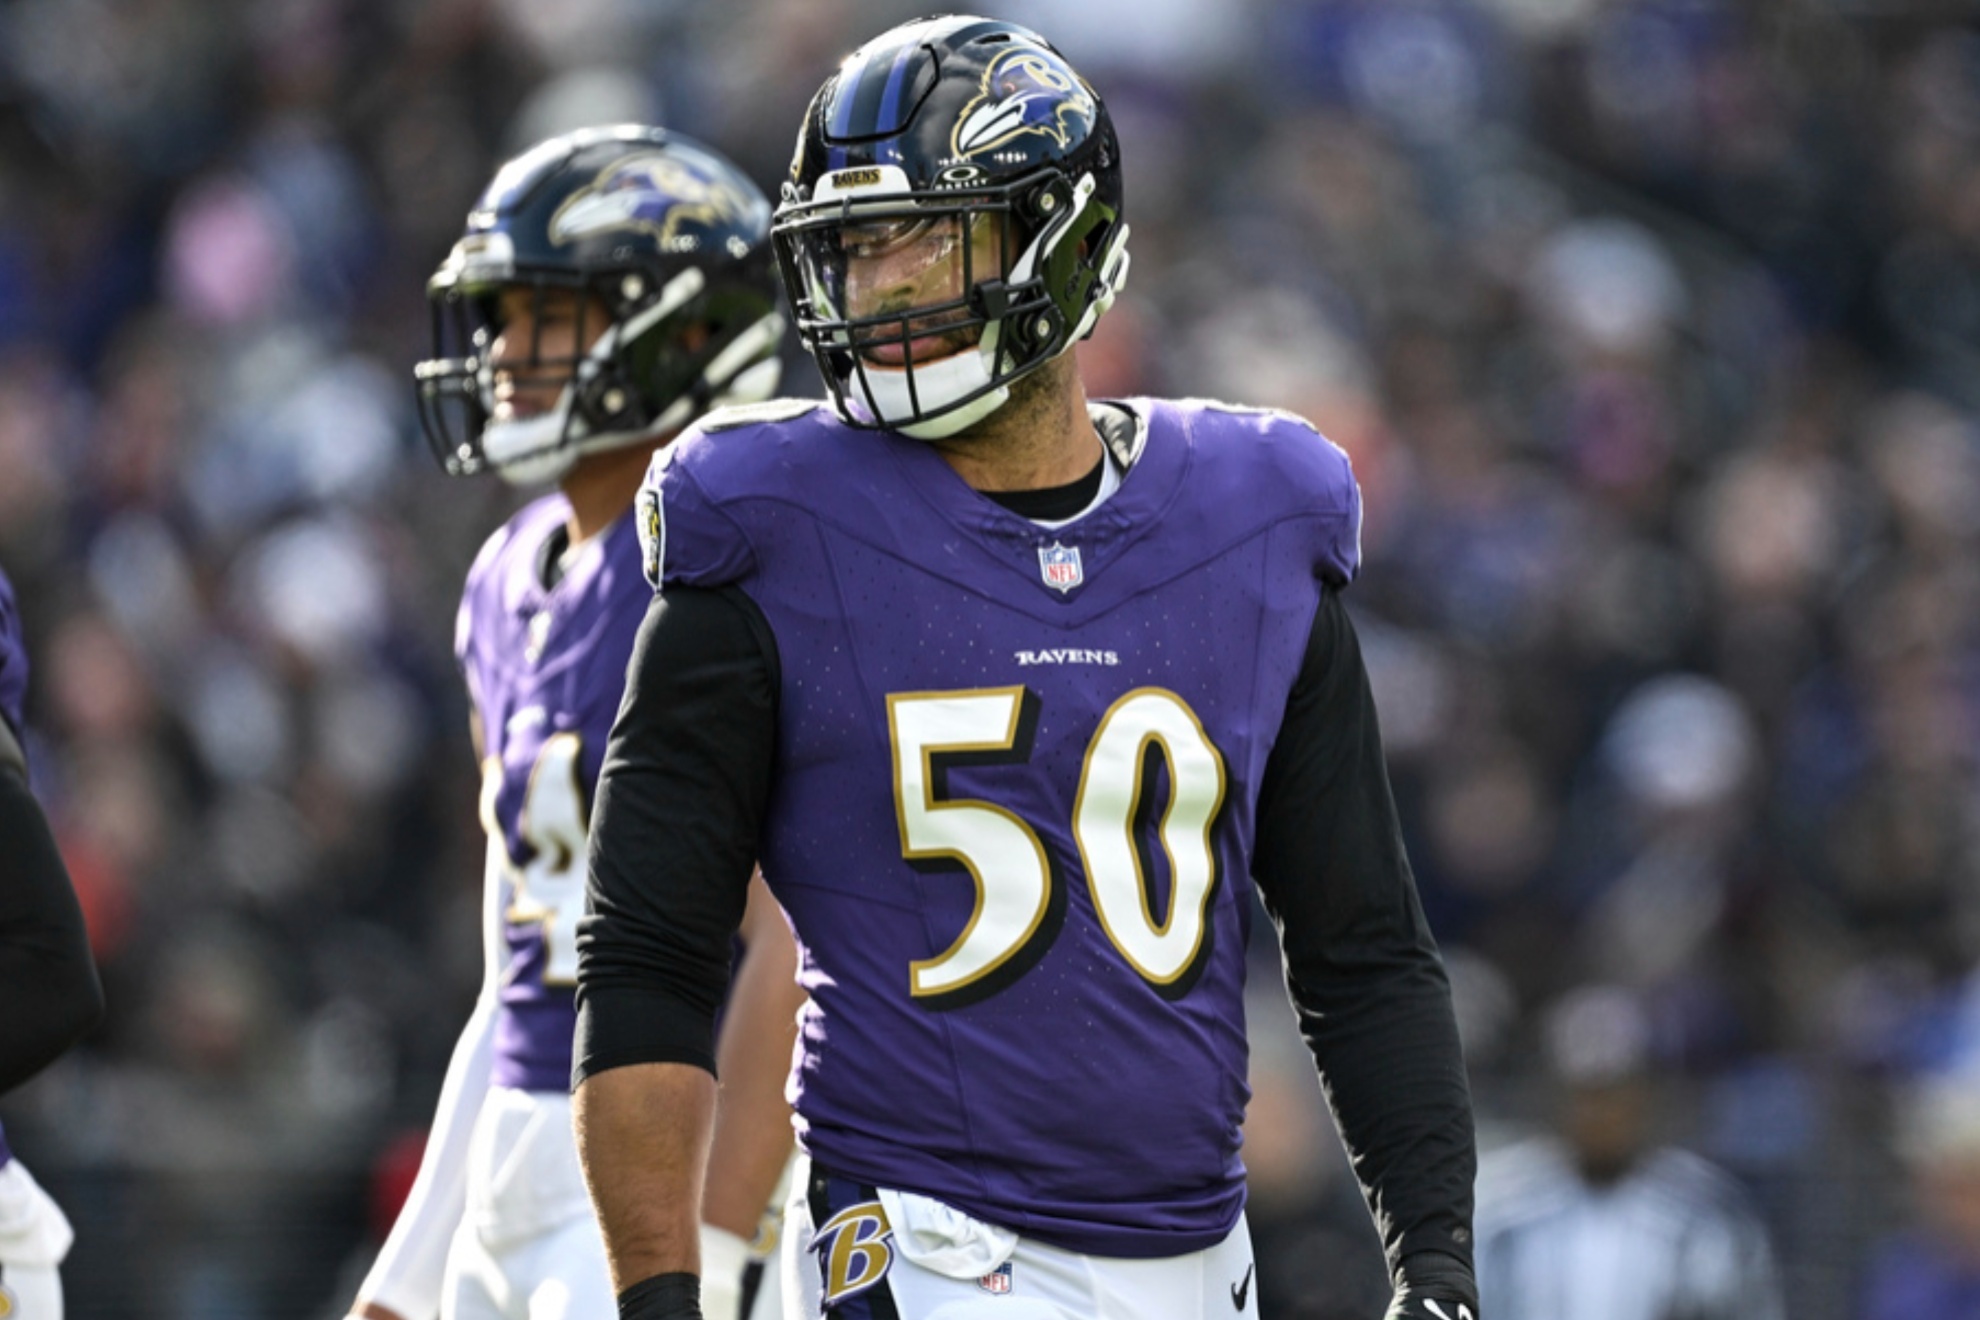 Kyle Van Noy signed a contract extension with the Baltimore Ravens